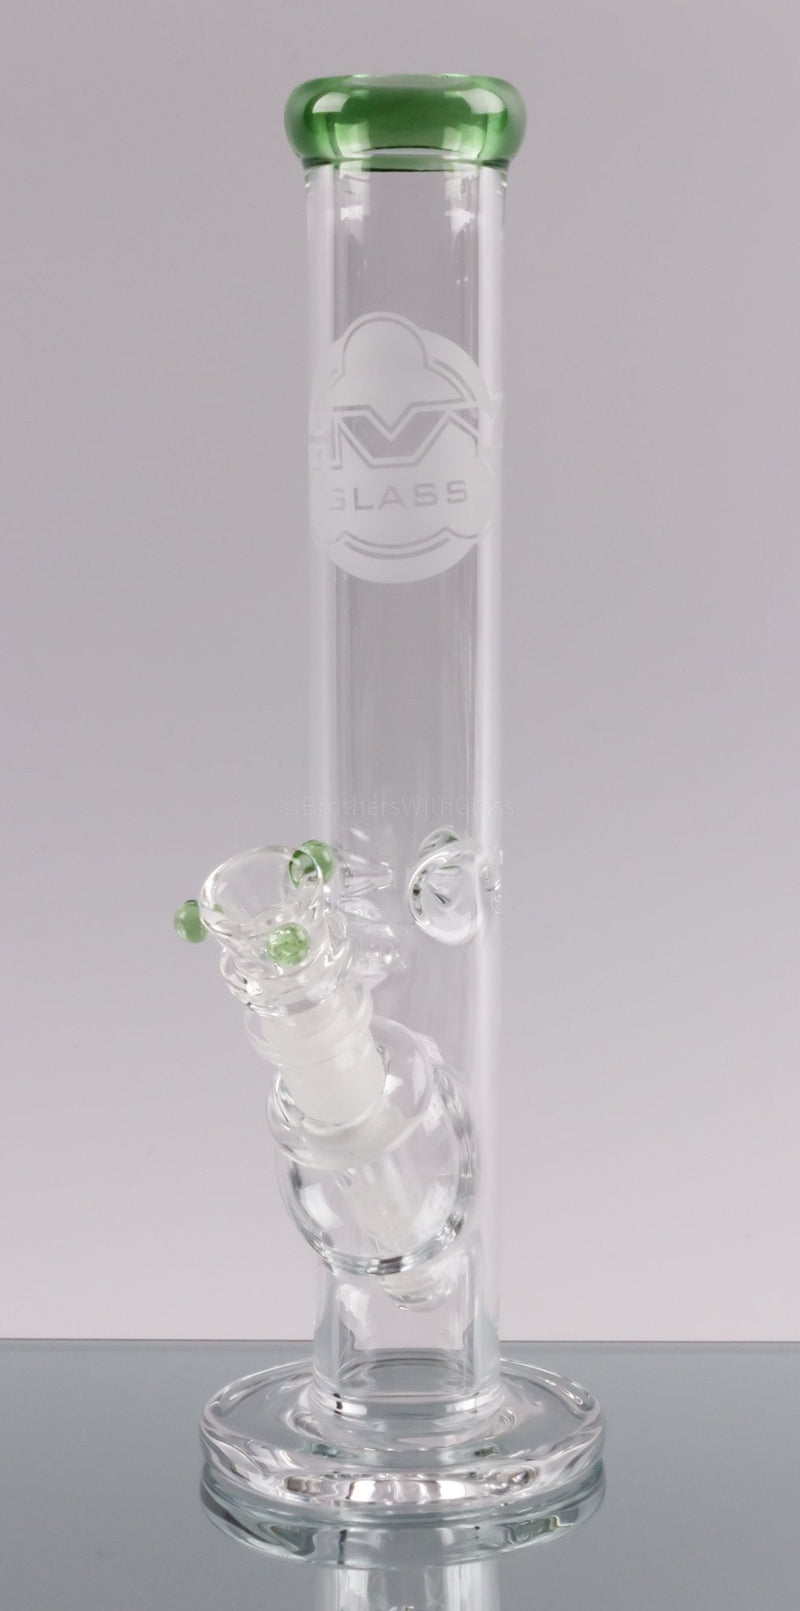 HVY Glass 10 In Color Wrap Straight Water Pipe - Green.